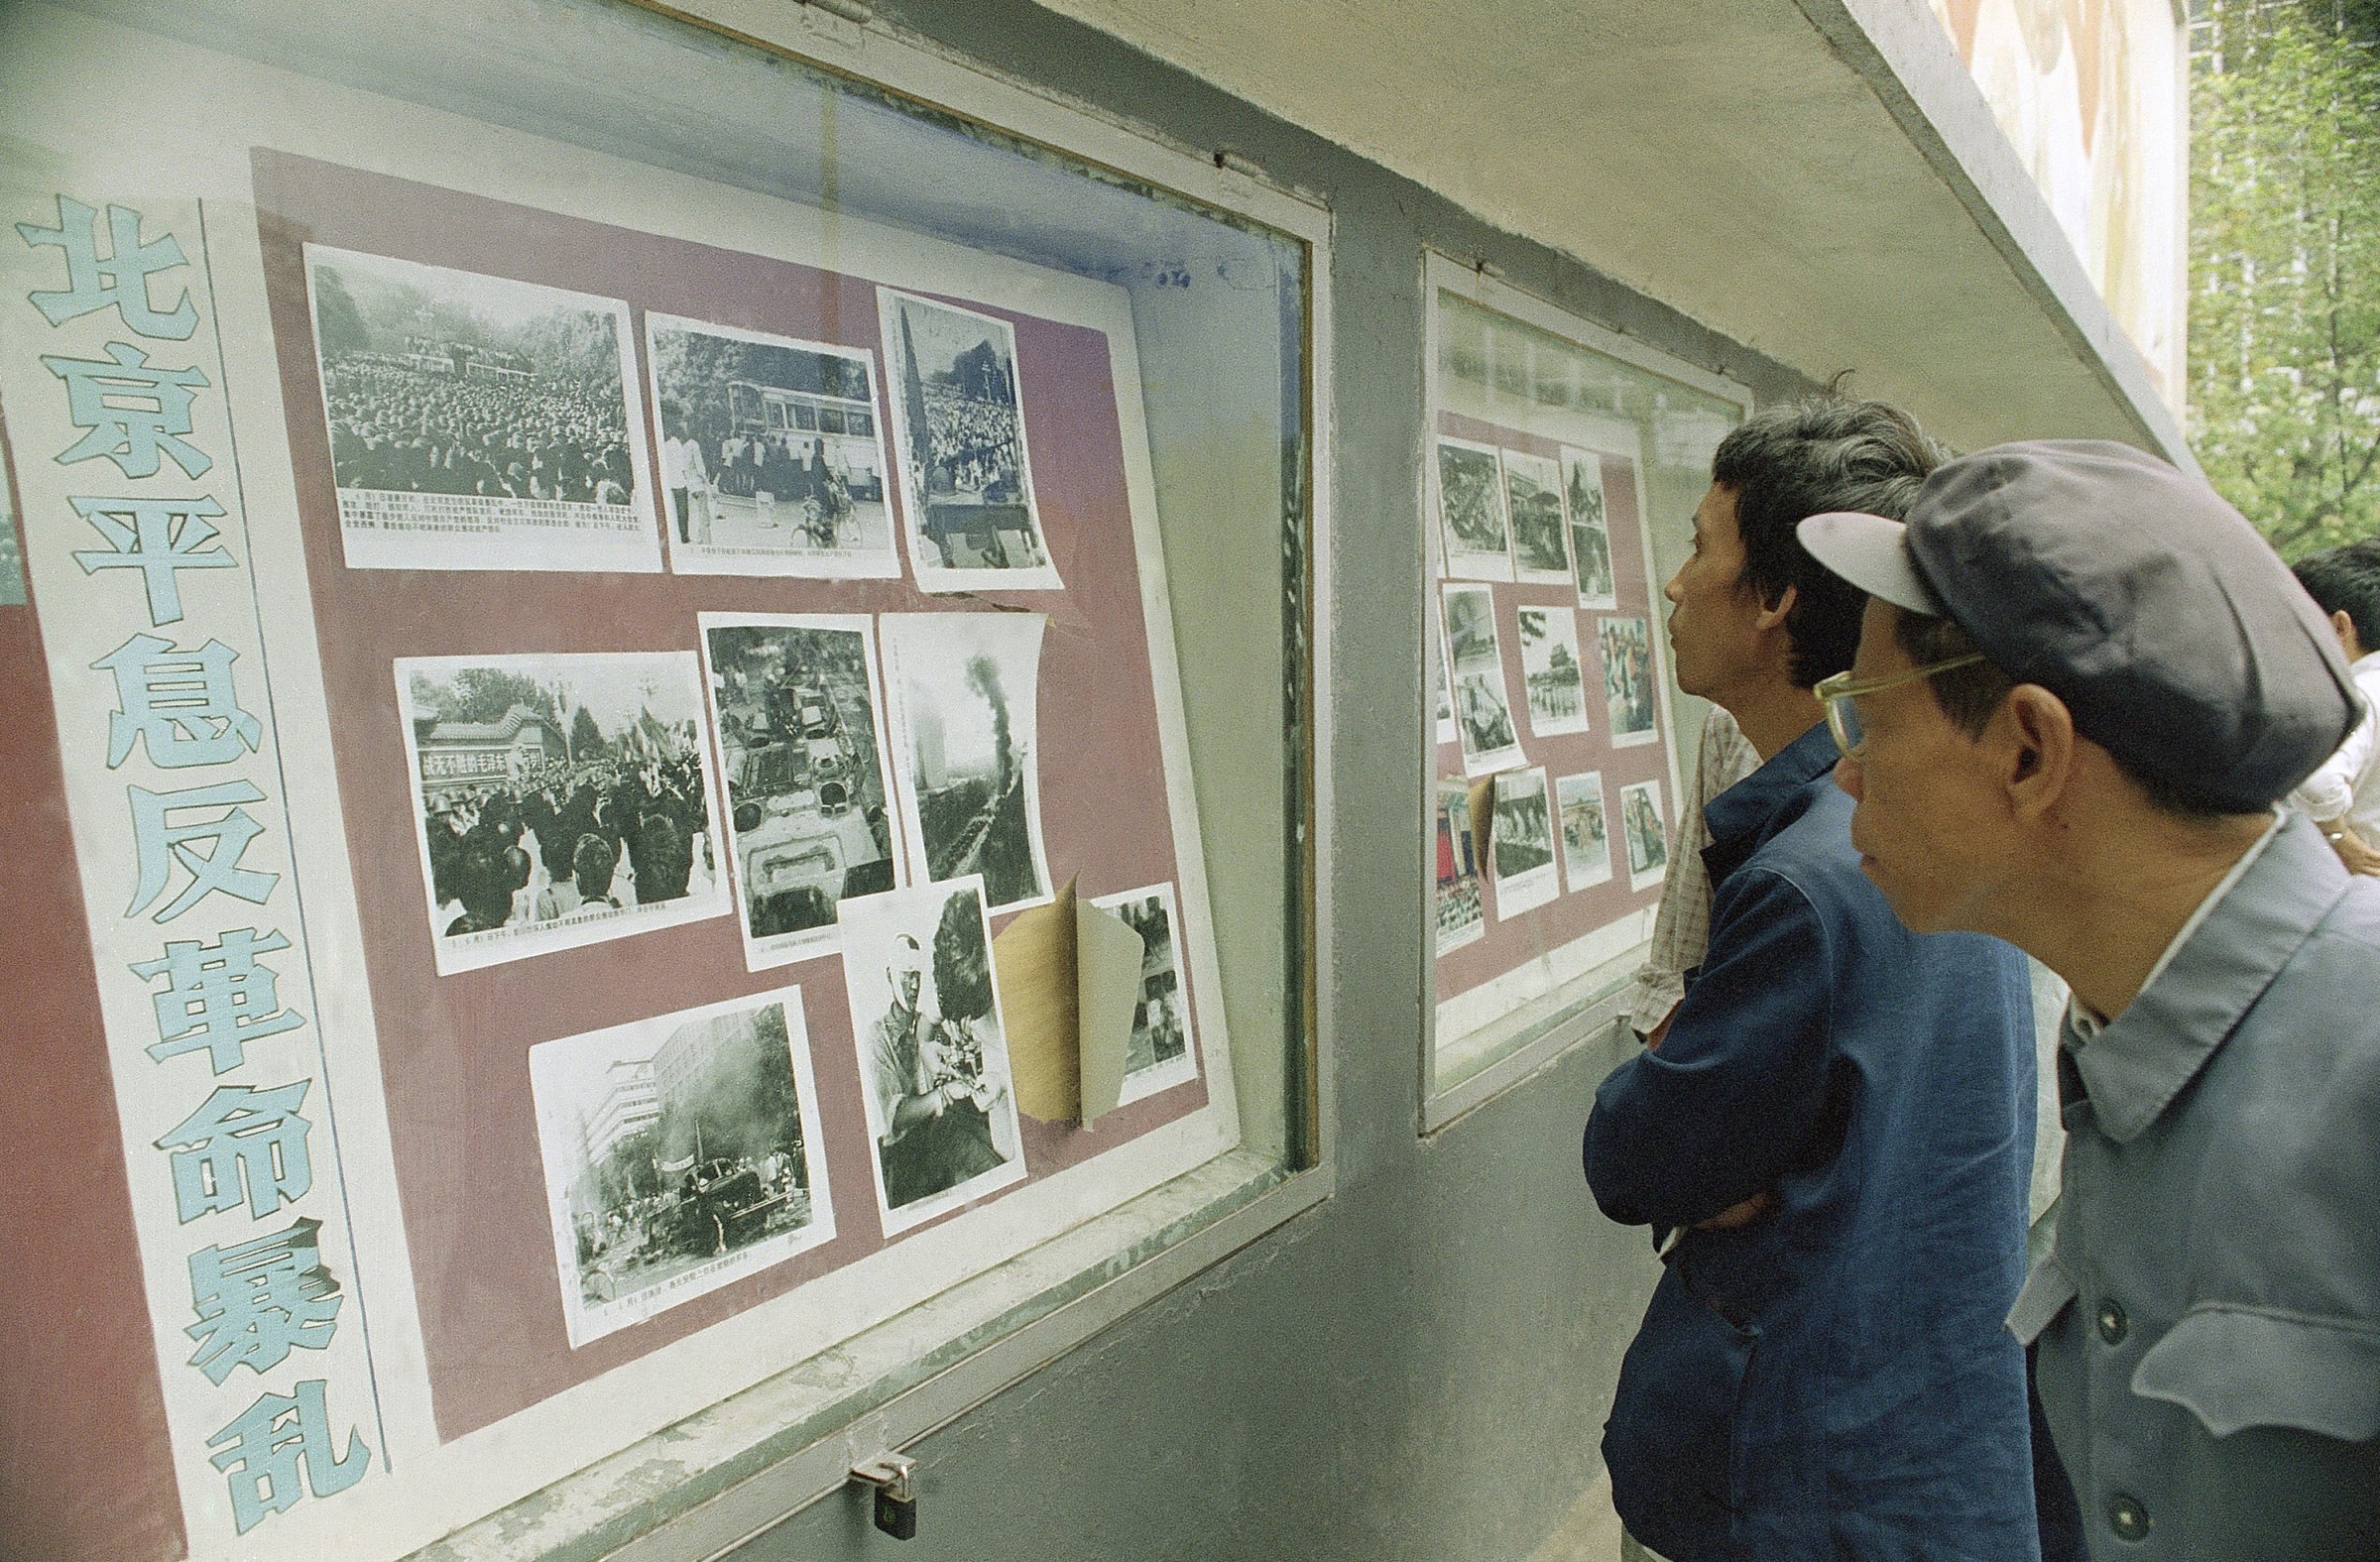 Viewers crowd around an official photo display in Chengdu, Sichuan Province, China Oct. 30, 1989 that depicts violent battles there in June between police and a crowd angered by the Beijing Tiananmen Square killings.